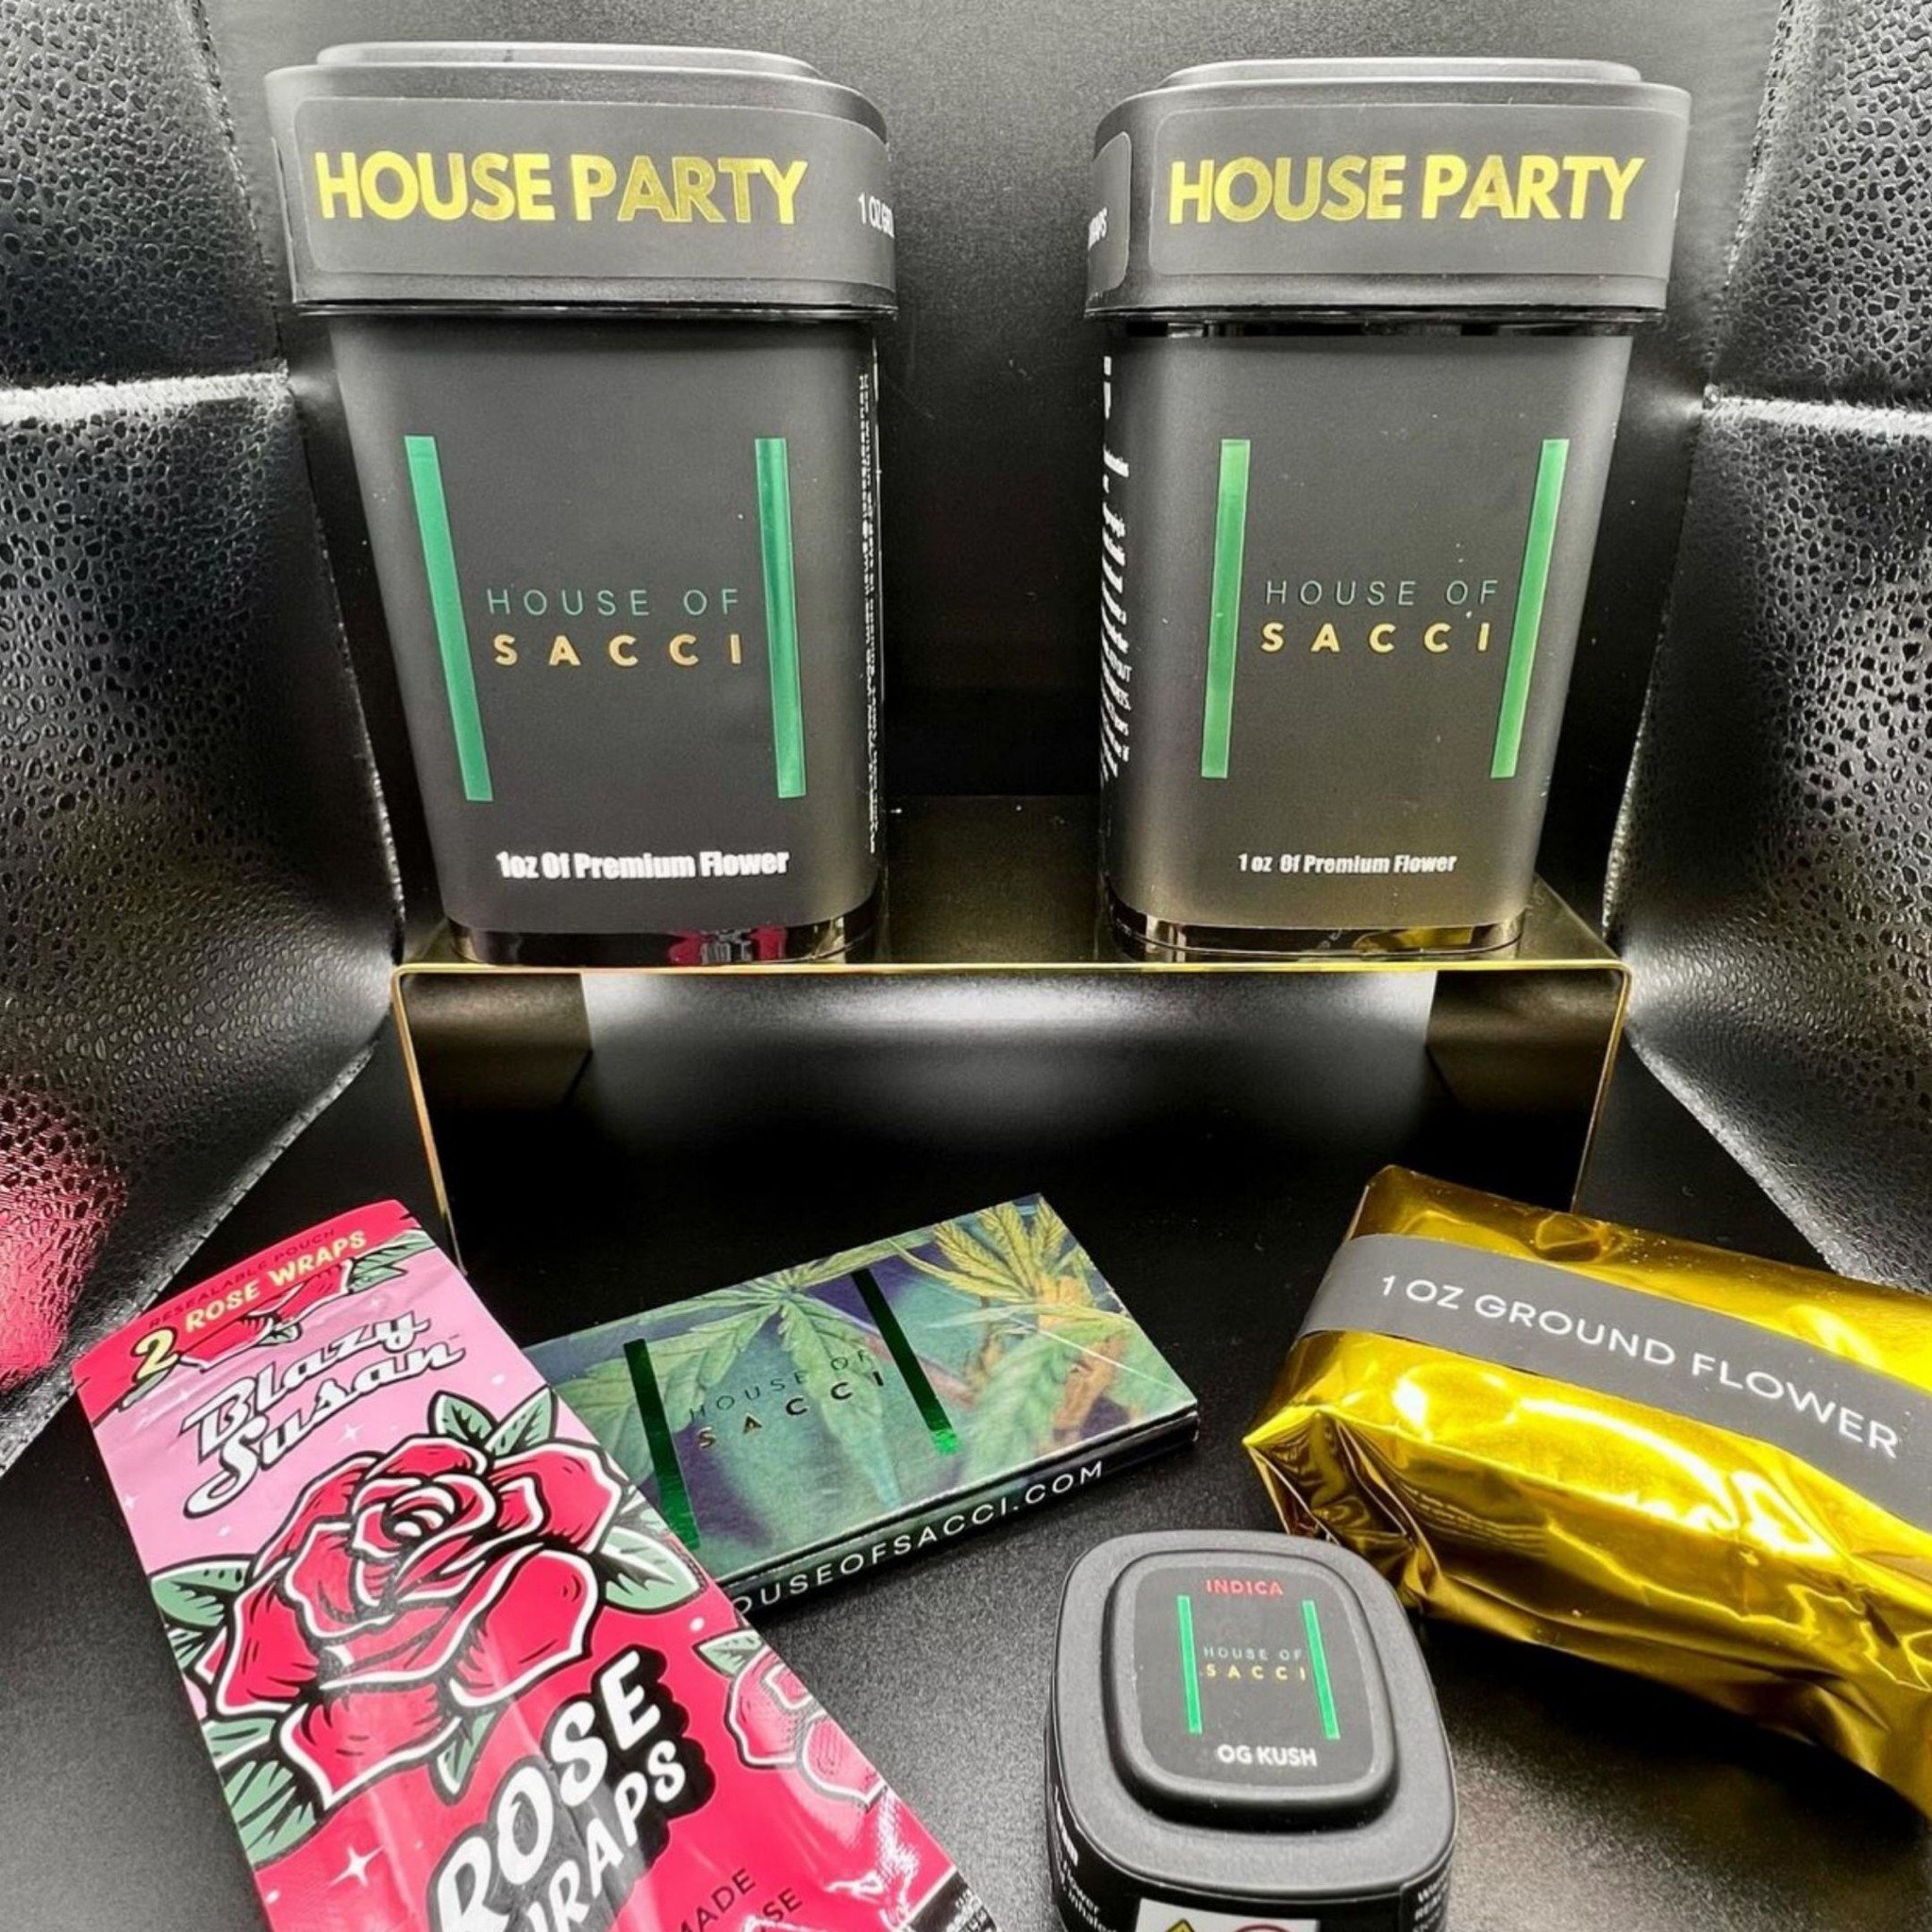 Everything you need right when you need it #houseparty 

💼✨ #Convenience #allinone #HouseOfSacci